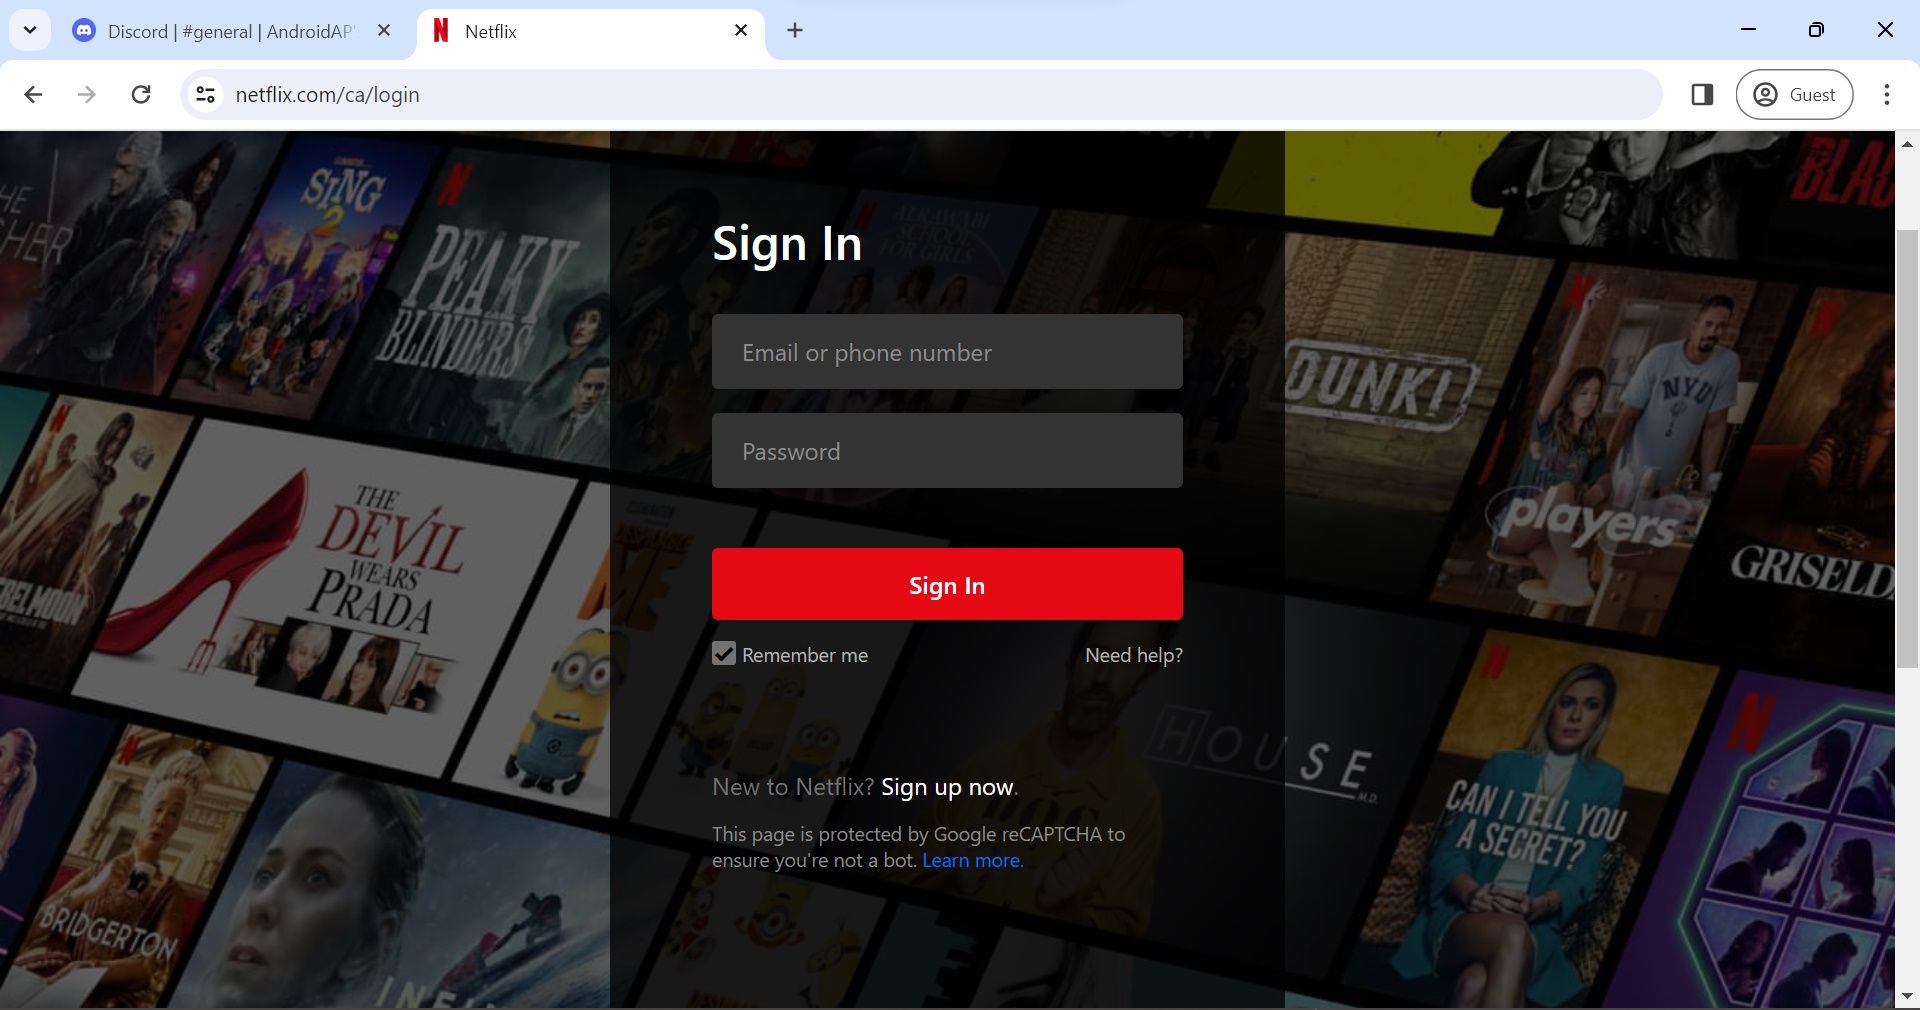 signing into netflix on a second chrome tab with sign in screen